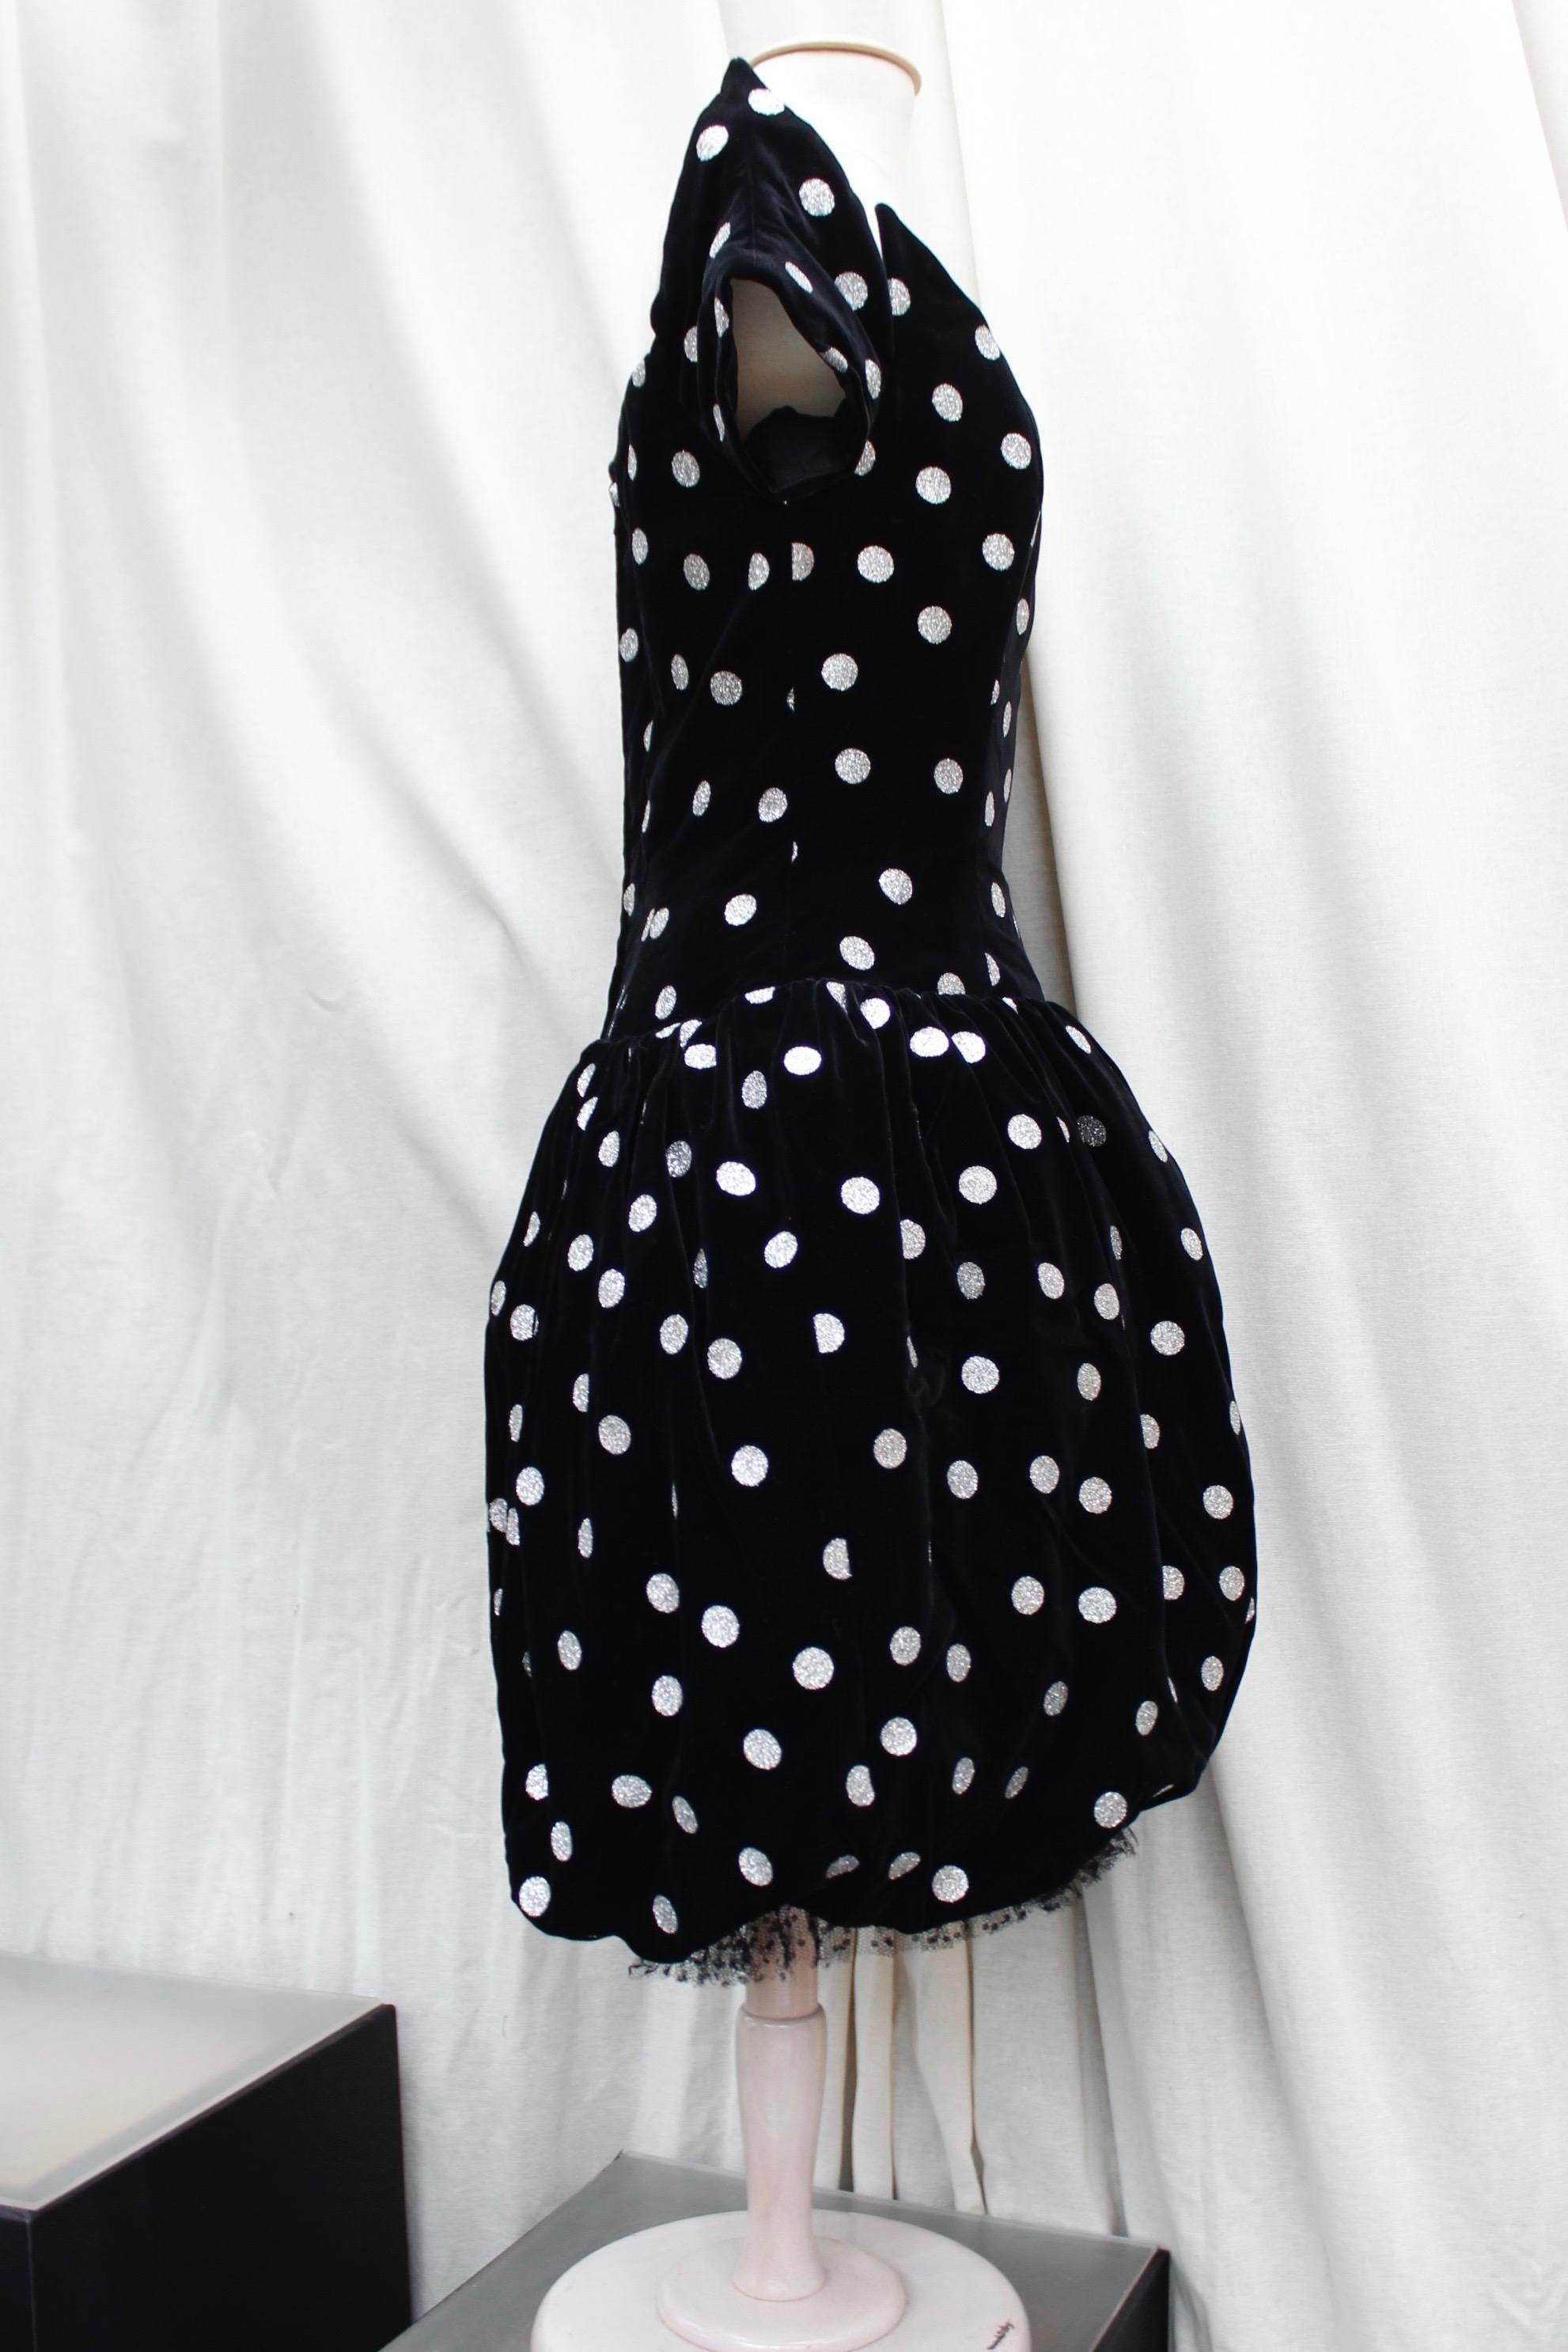 Black Lanvin lovely ball-shaped dress in black velvet with silvery dots For Sale